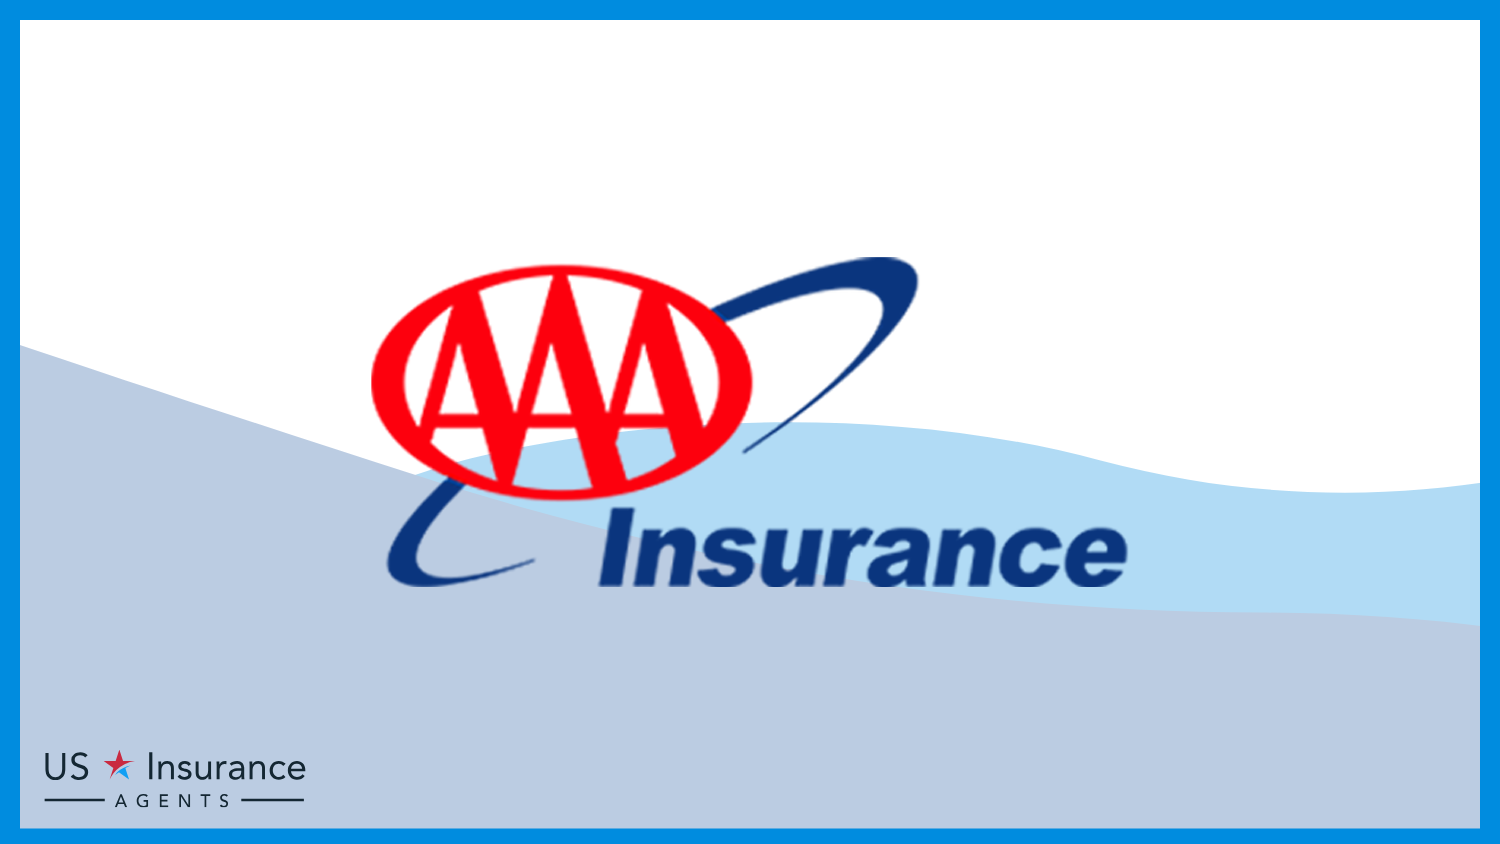 AAA: Best Business Insurance for Postmates Drivers